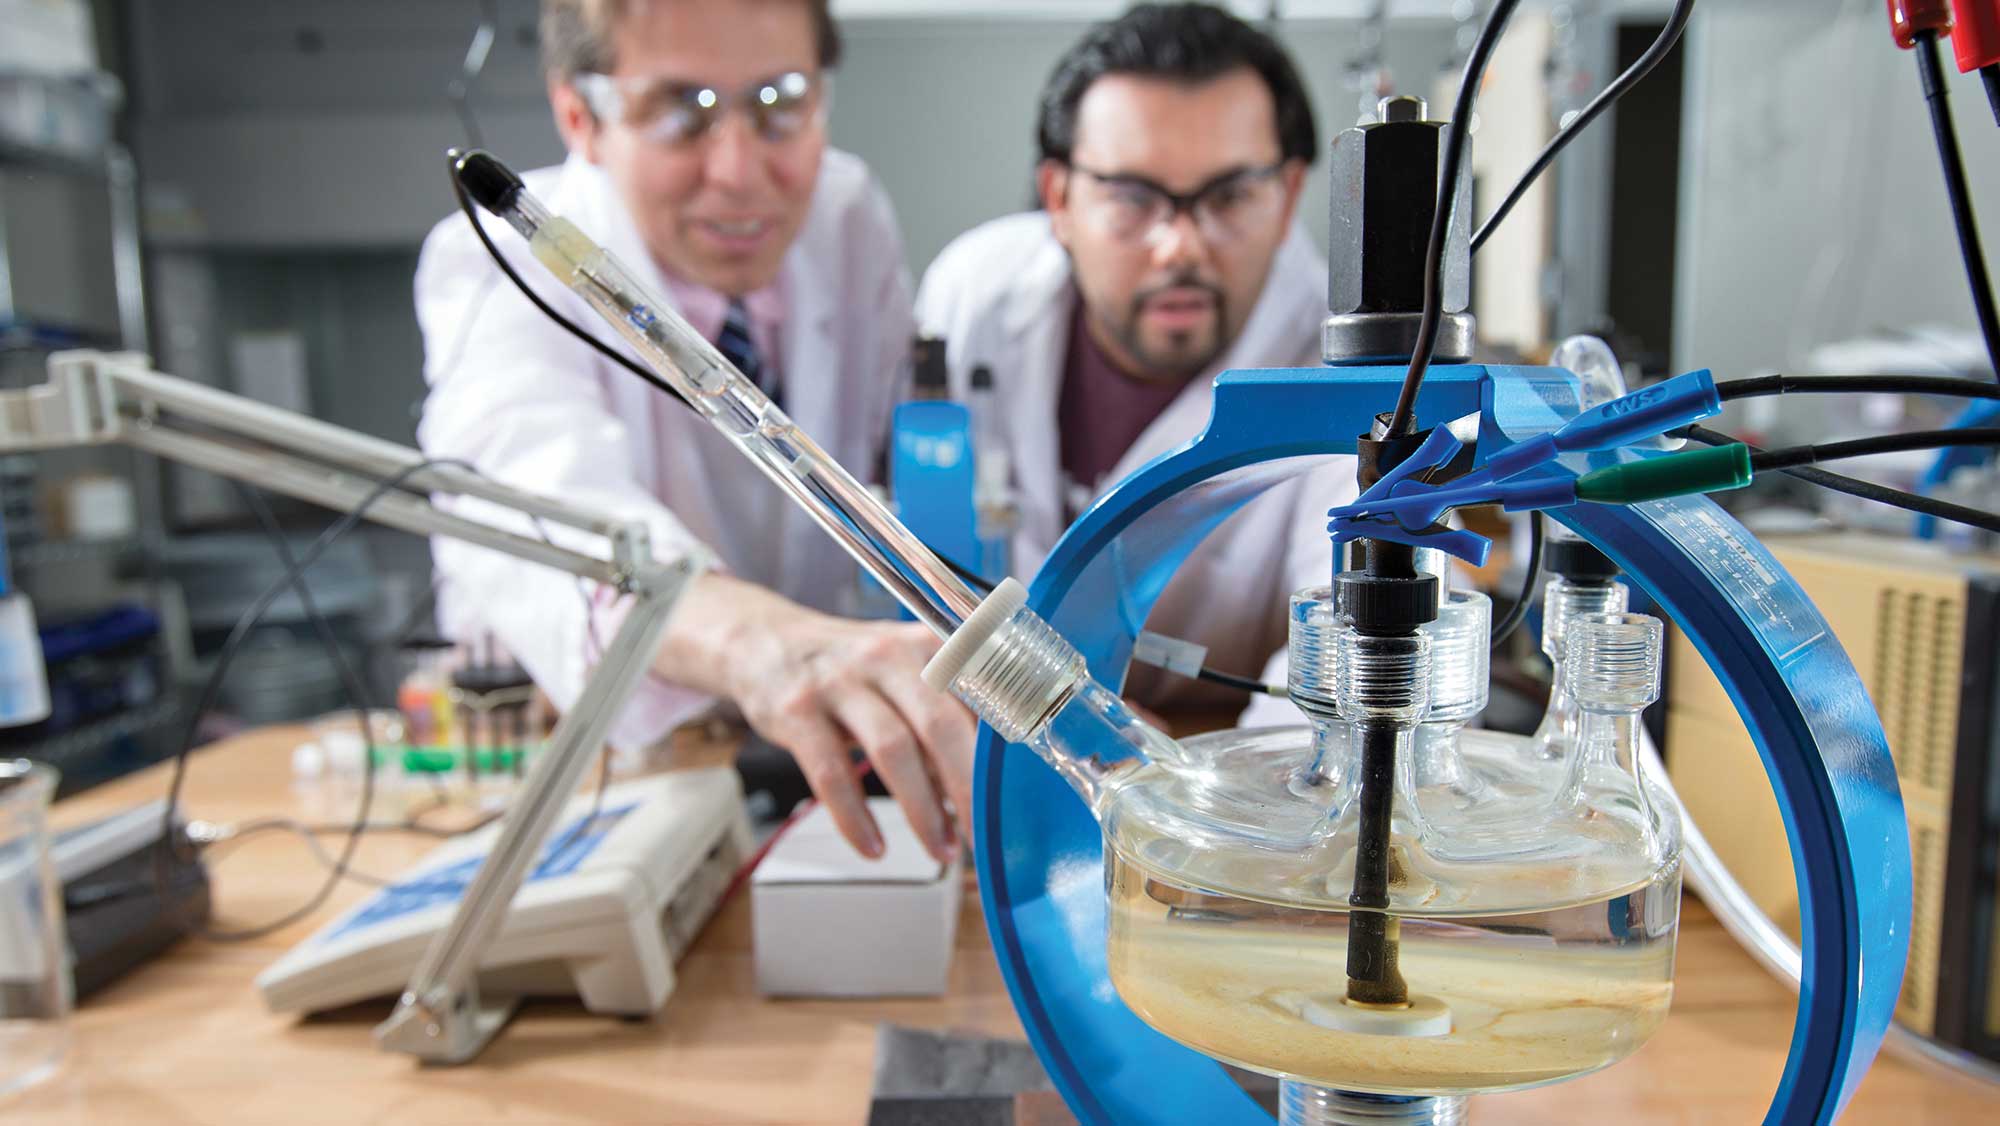 professor and student conducting materials research in a lab